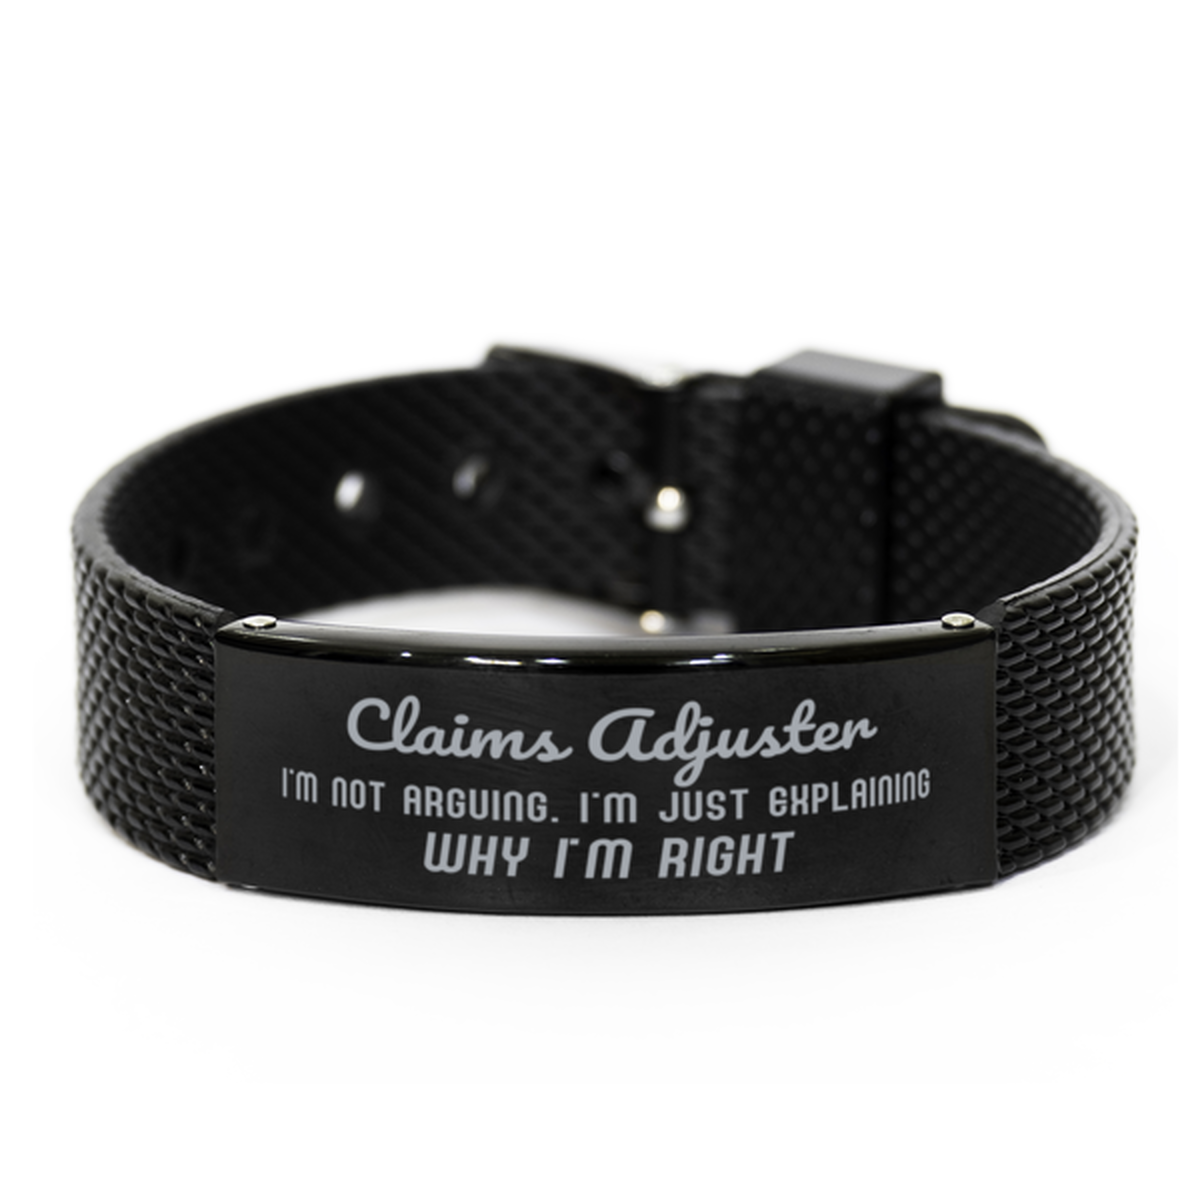 Claims Adjuster I'm not Arguing. I'm Just Explaining Why I'm RIGHT Black Shark Mesh Bracelet, Funny Saying Quote Claims Adjuster Gifts For Claims Adjuster Graduation Birthday Christmas Gifts for Men Women Coworker